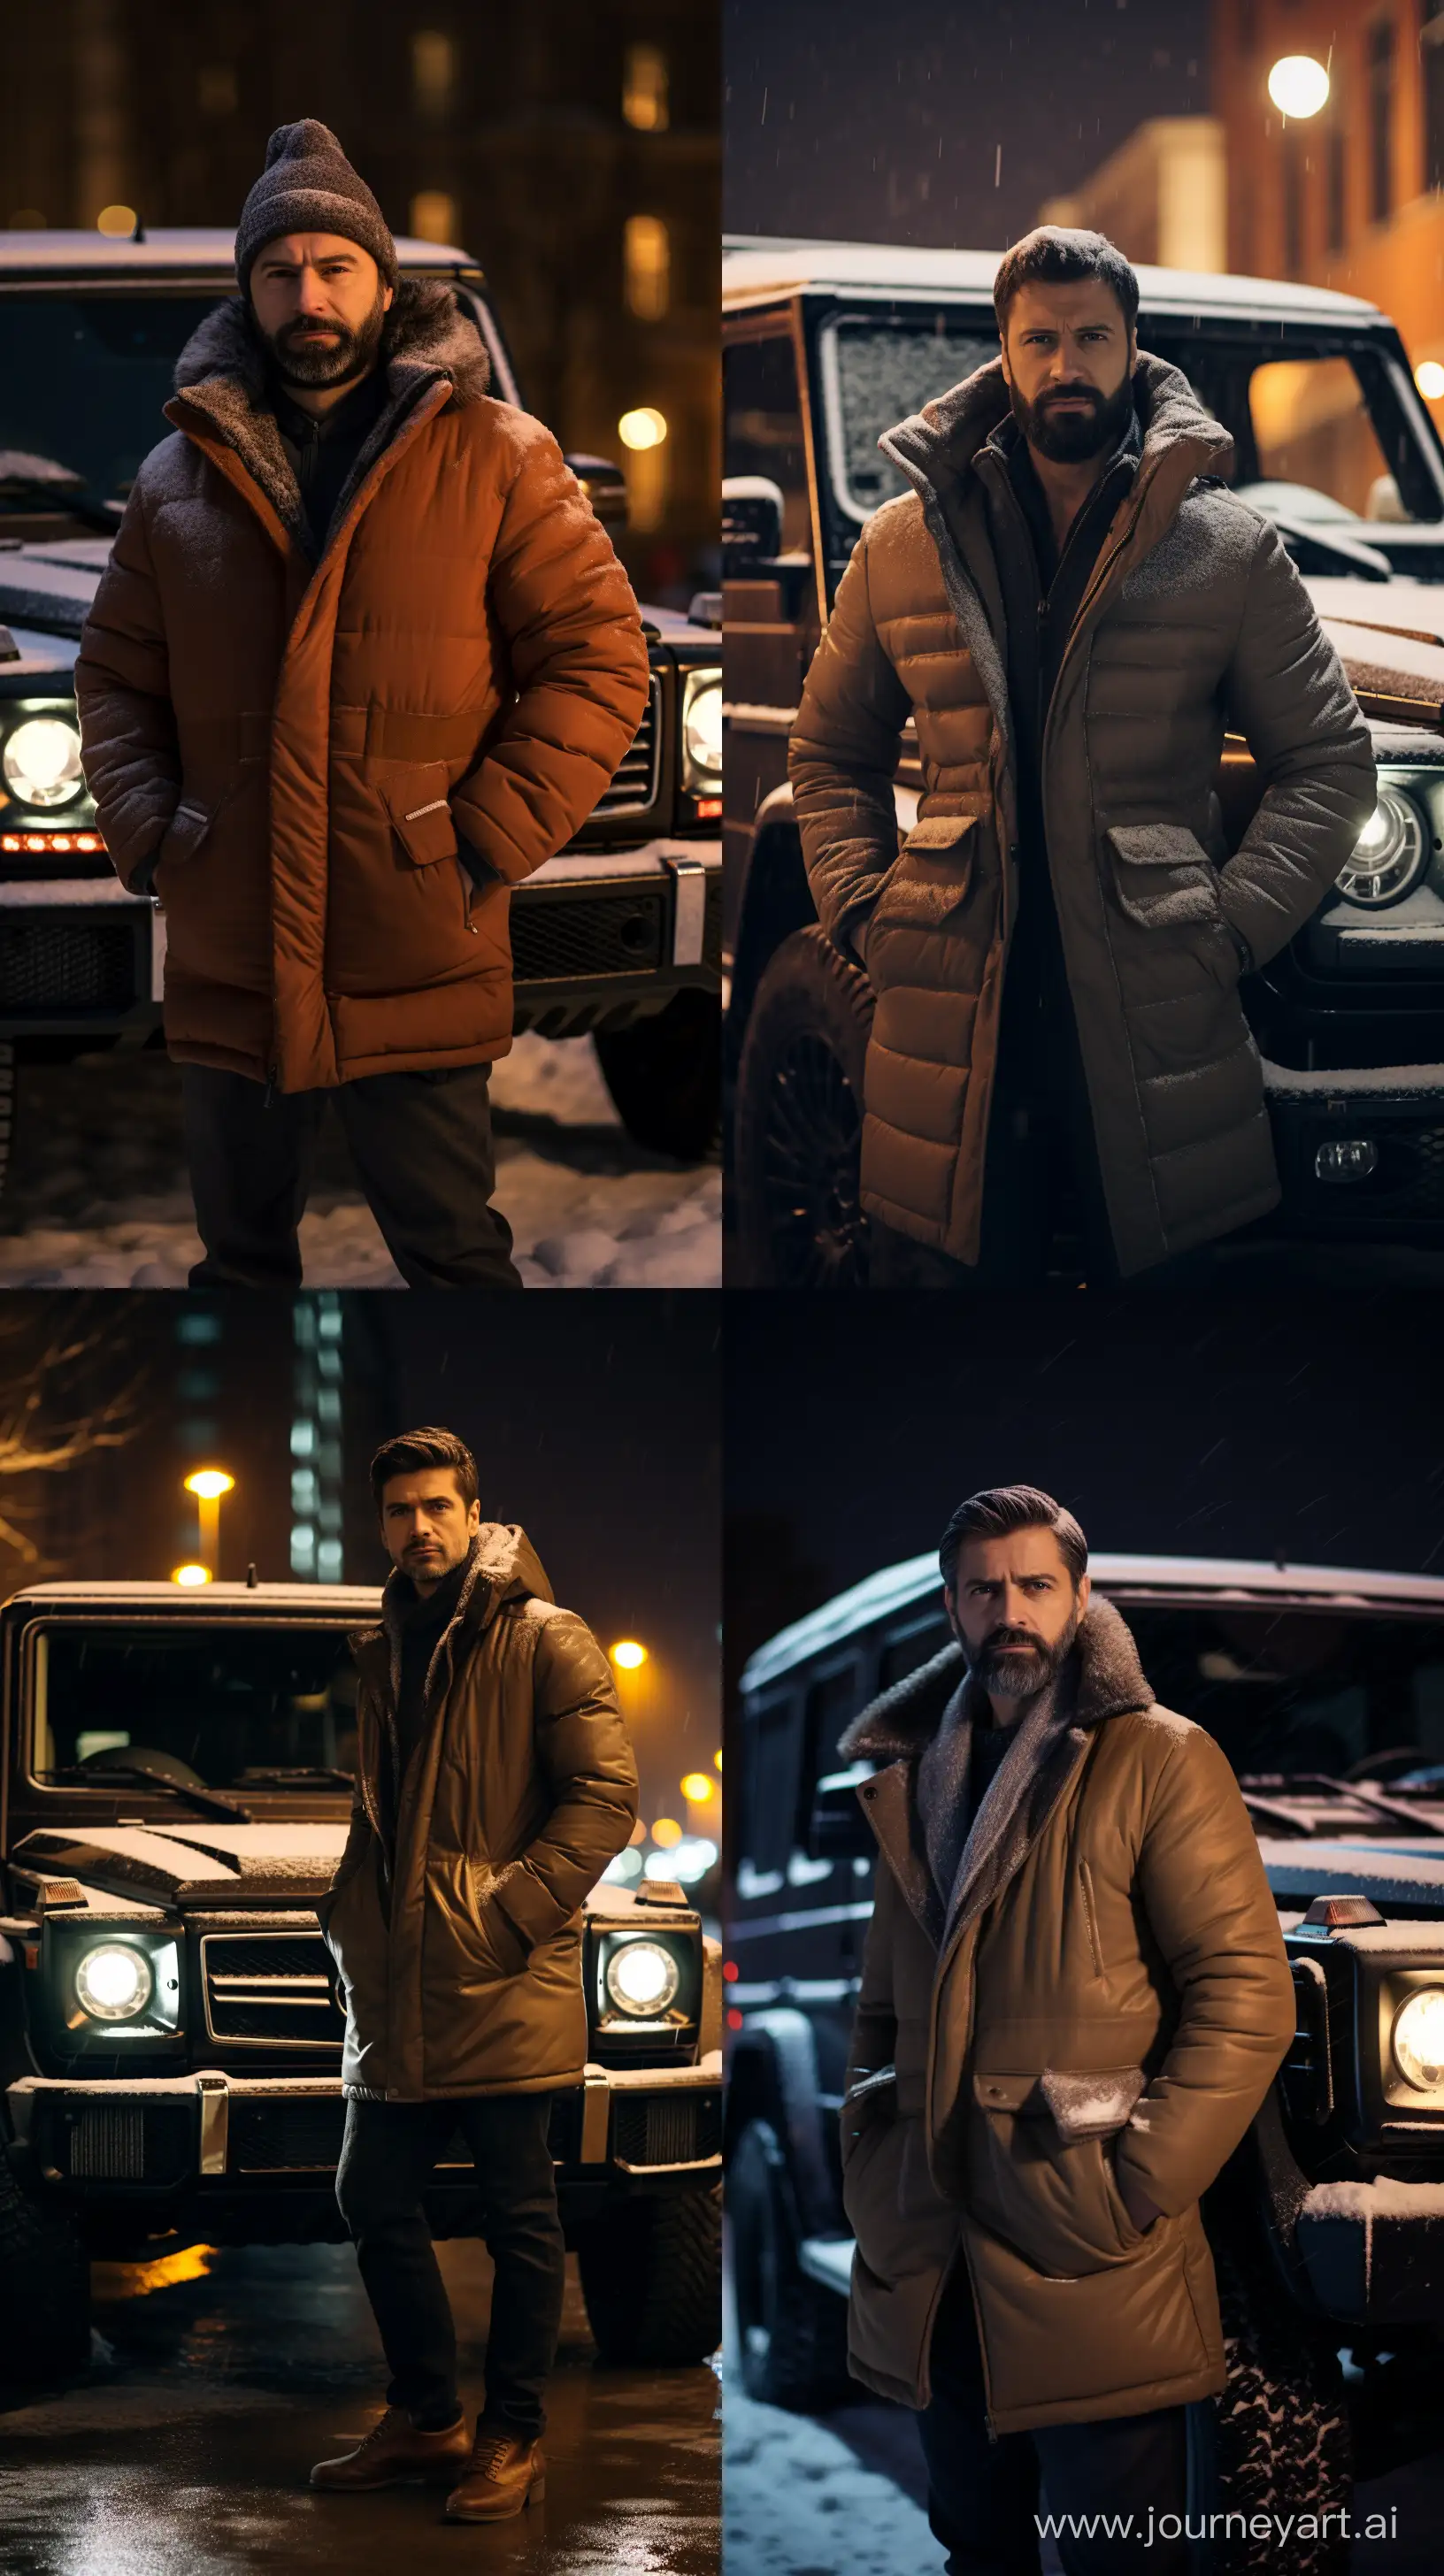 A man with brown hair, in the 60s and 70s of the USSR, stylishly dressed, standing next to a car Мерседес g65 Брабус, it's snowing in winter, the lights are on in the evening,man aged 40, Canon EOS 5D Mark IV DSLR, f/8 aperture, 1/125 second shutter speed, ISO 800, professional lighting setup, Adobe Photoshop, attention to detail::3 --ar 9:16